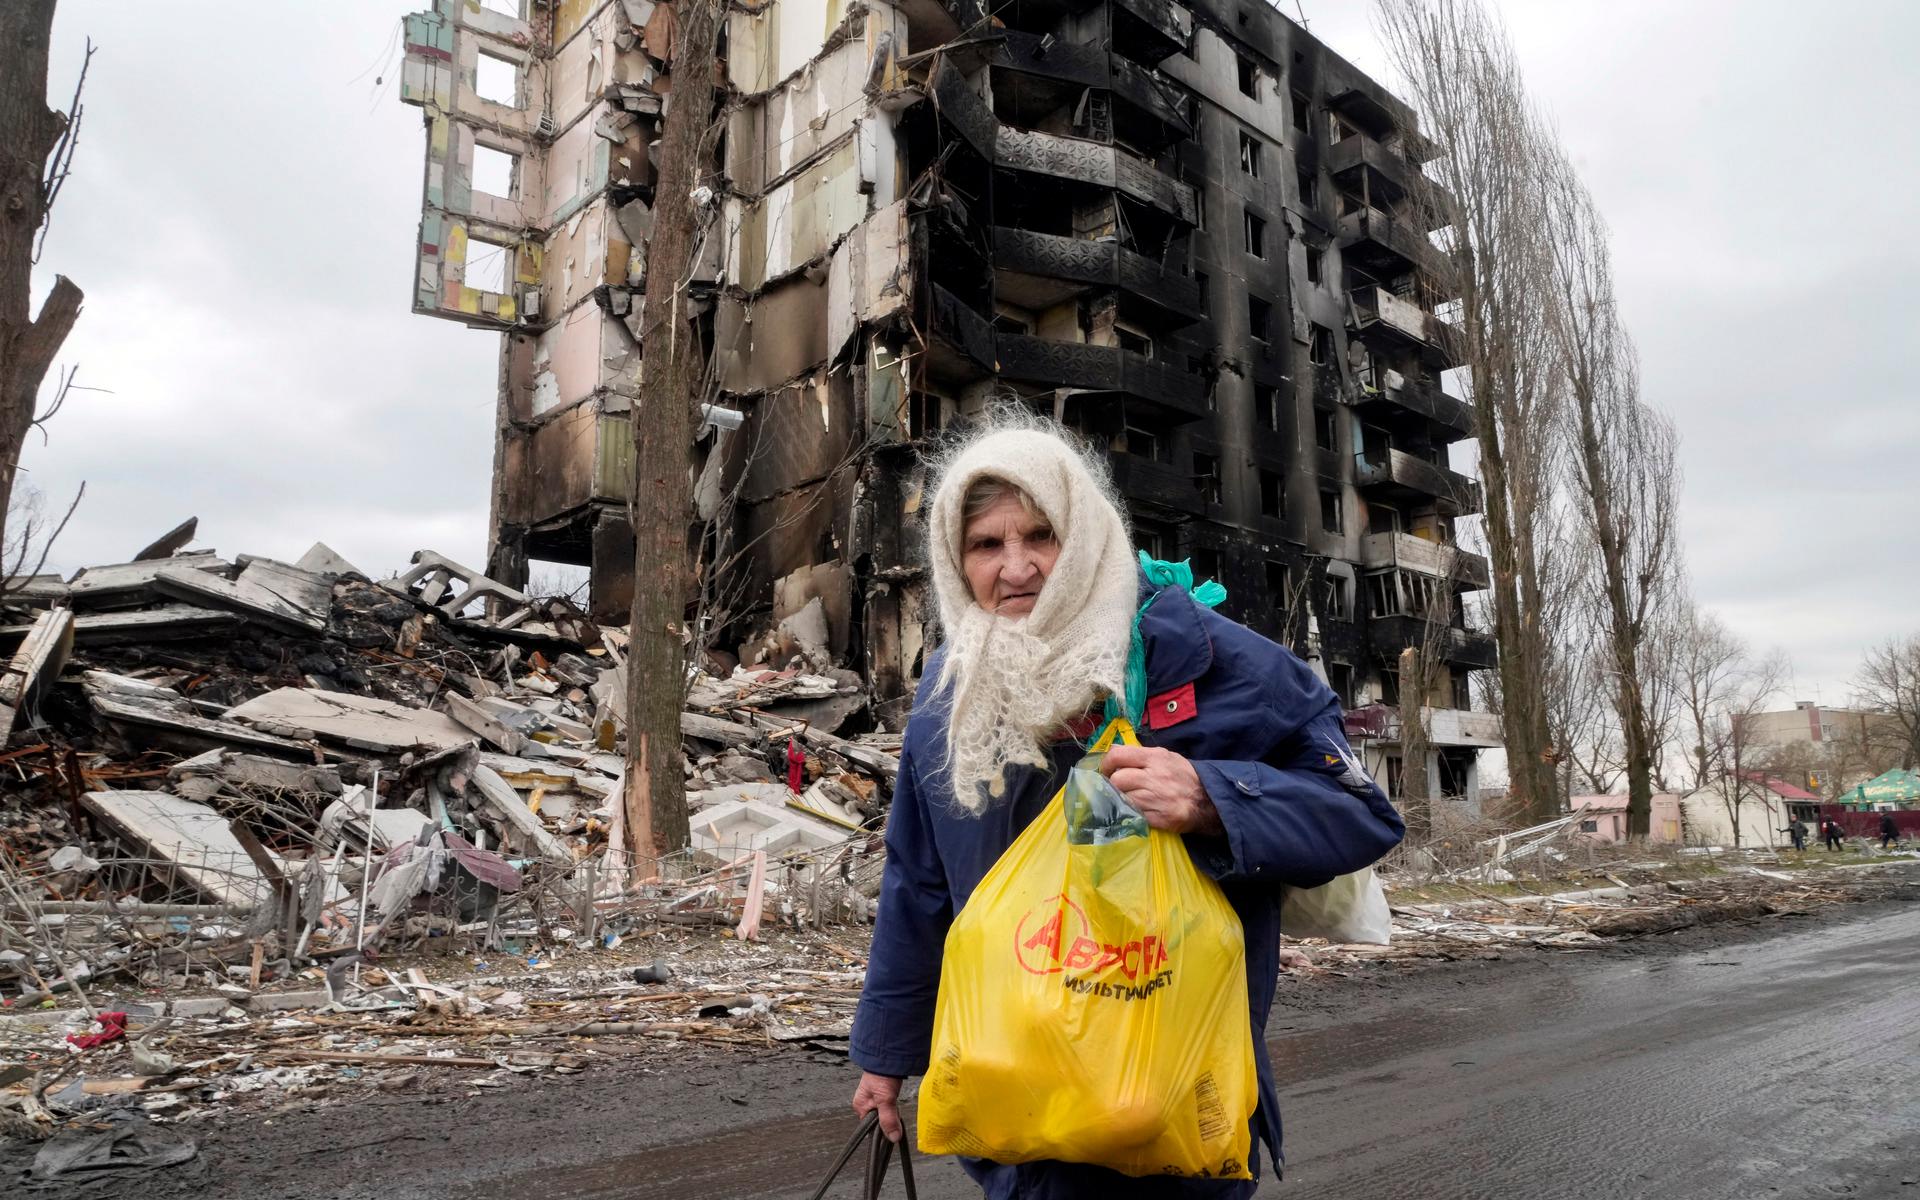 An elderly woman walks by an apartment building destroyed in the Russian shelling in Borodyanka, Ukraine, Wednesday, April 6, 2022. (AP Photo/Efrem Lukatsky)  NYAG504